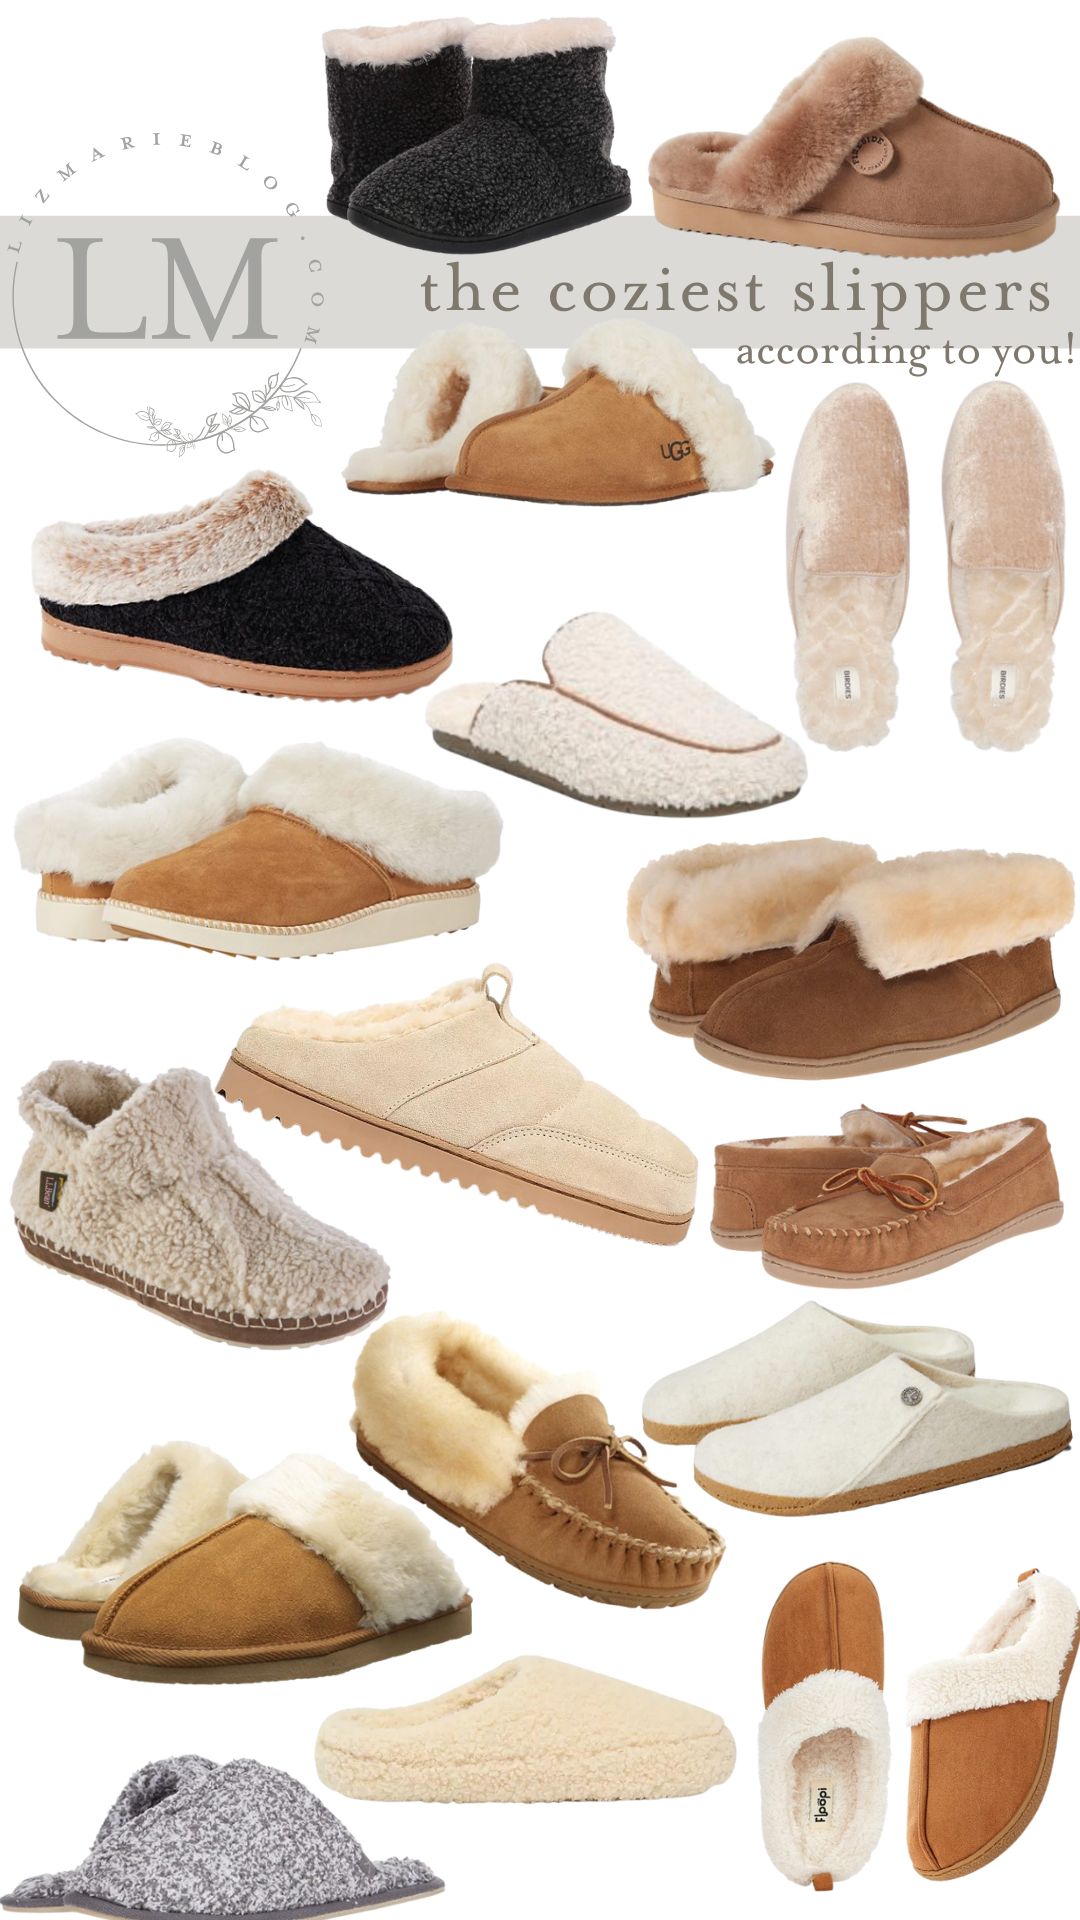 The Best Slippers – 30+ Cozy Slippers according to you!